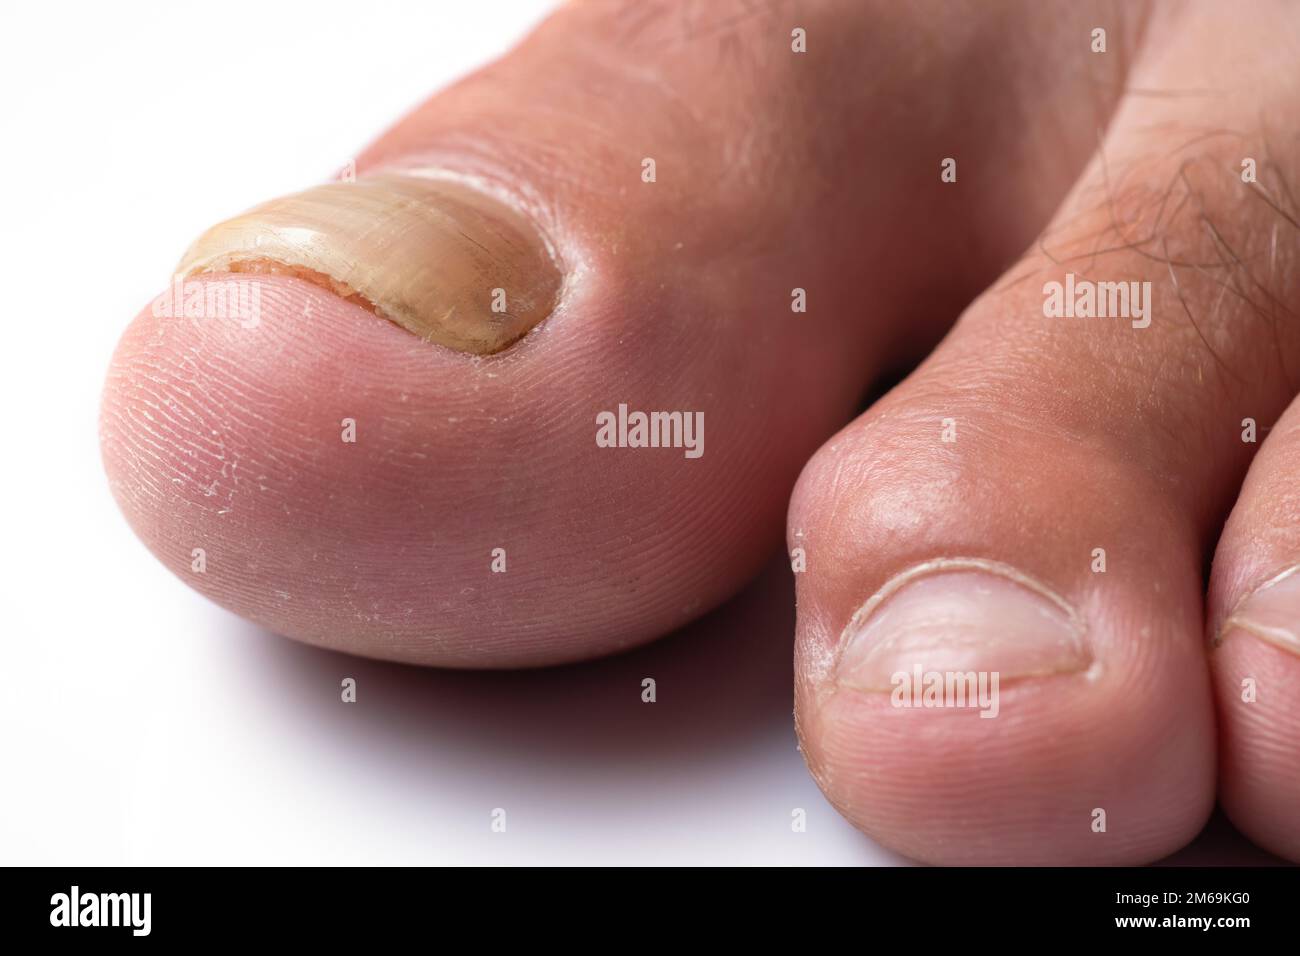 Toe nail with psoriasis and healthy toe nails, Psoriatic nail, close-up Stock Photo